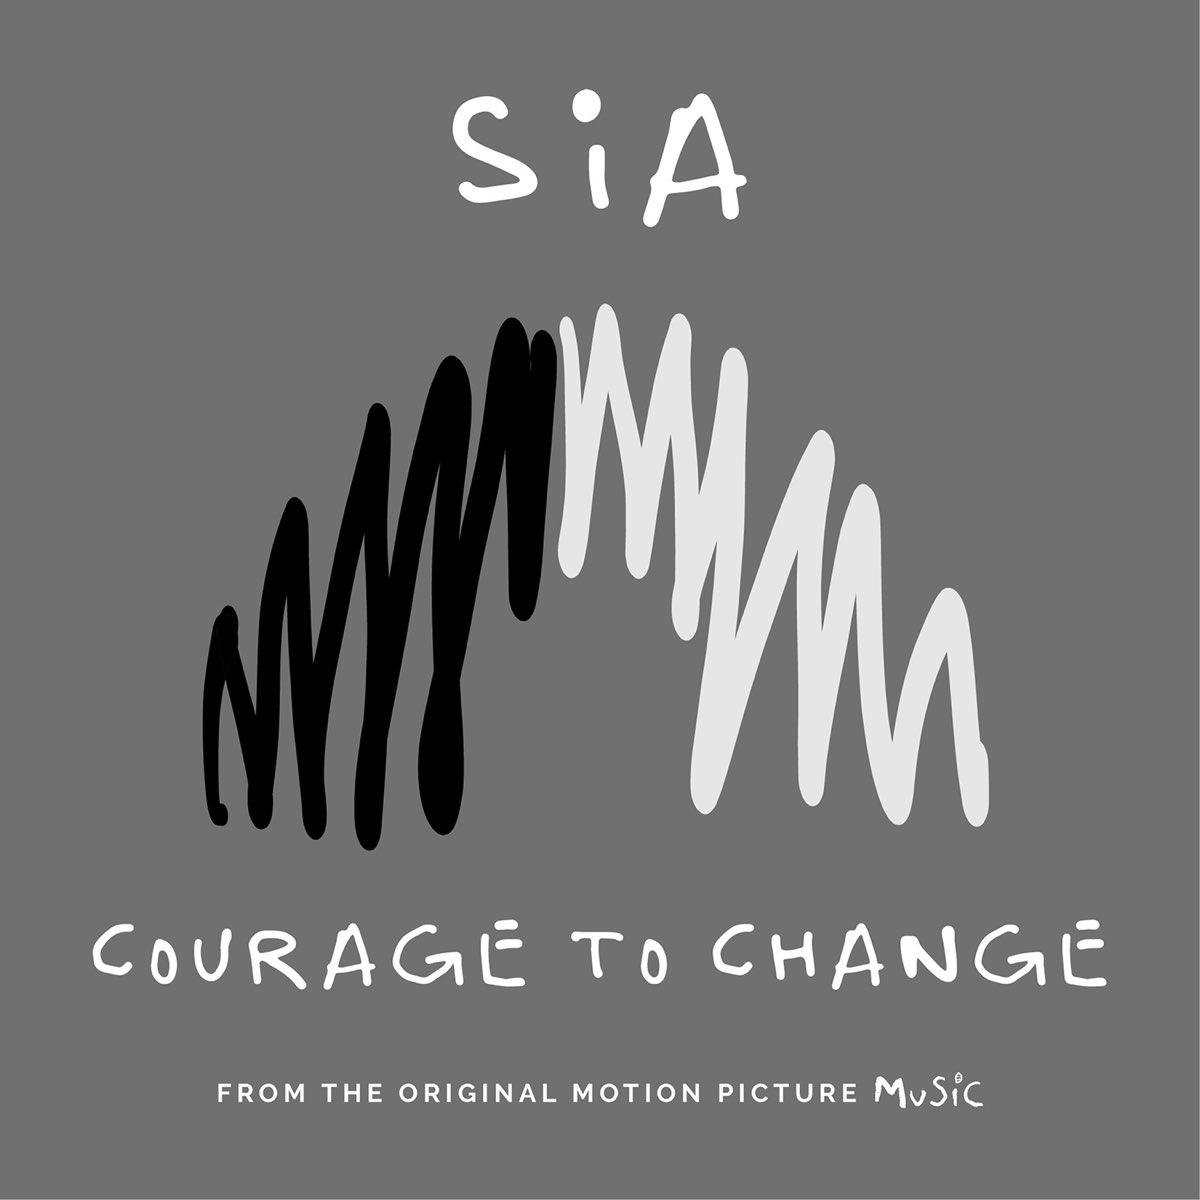 Sia Courage to change. Courage to change (from the Motion picture "Music") от Sia. Sia музыкальная обложка. Sia обложки альбомов. Sia change